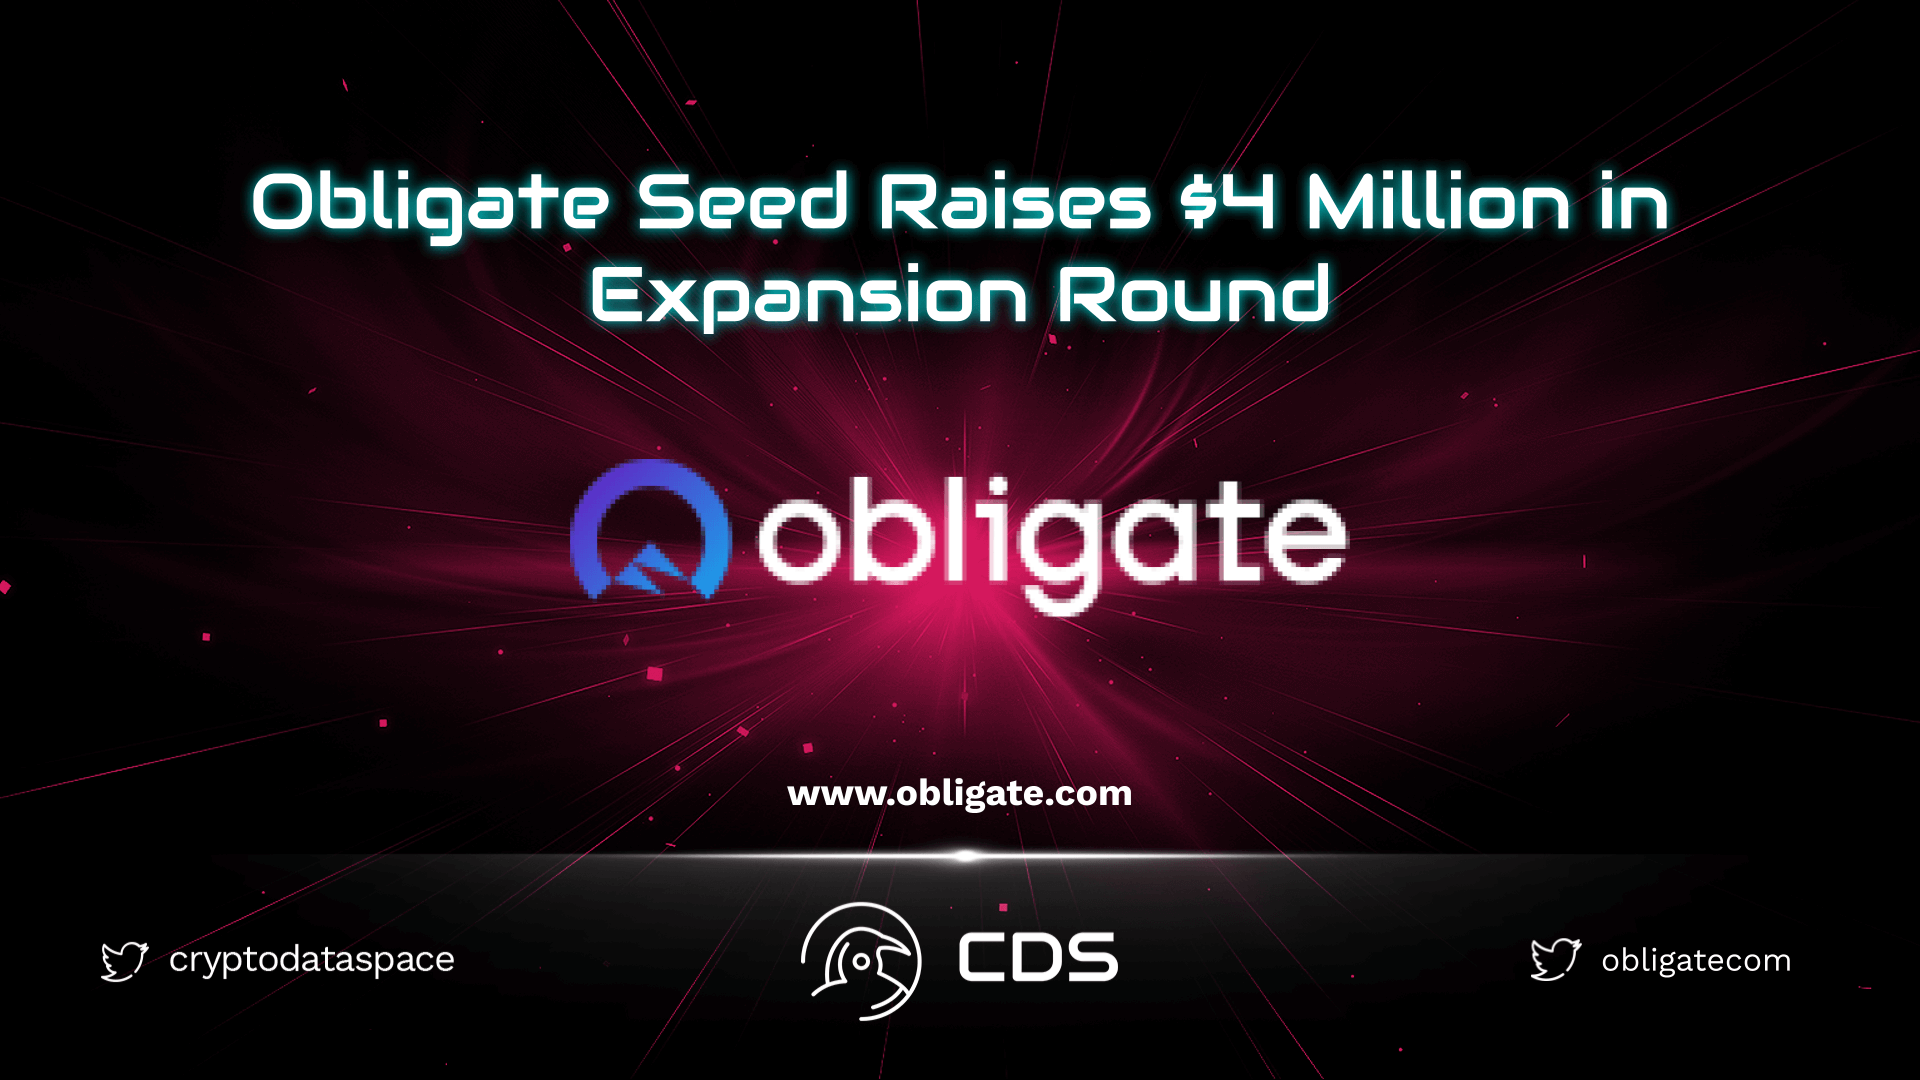 Obligate Seed Raises $4 Million in Expansion Round